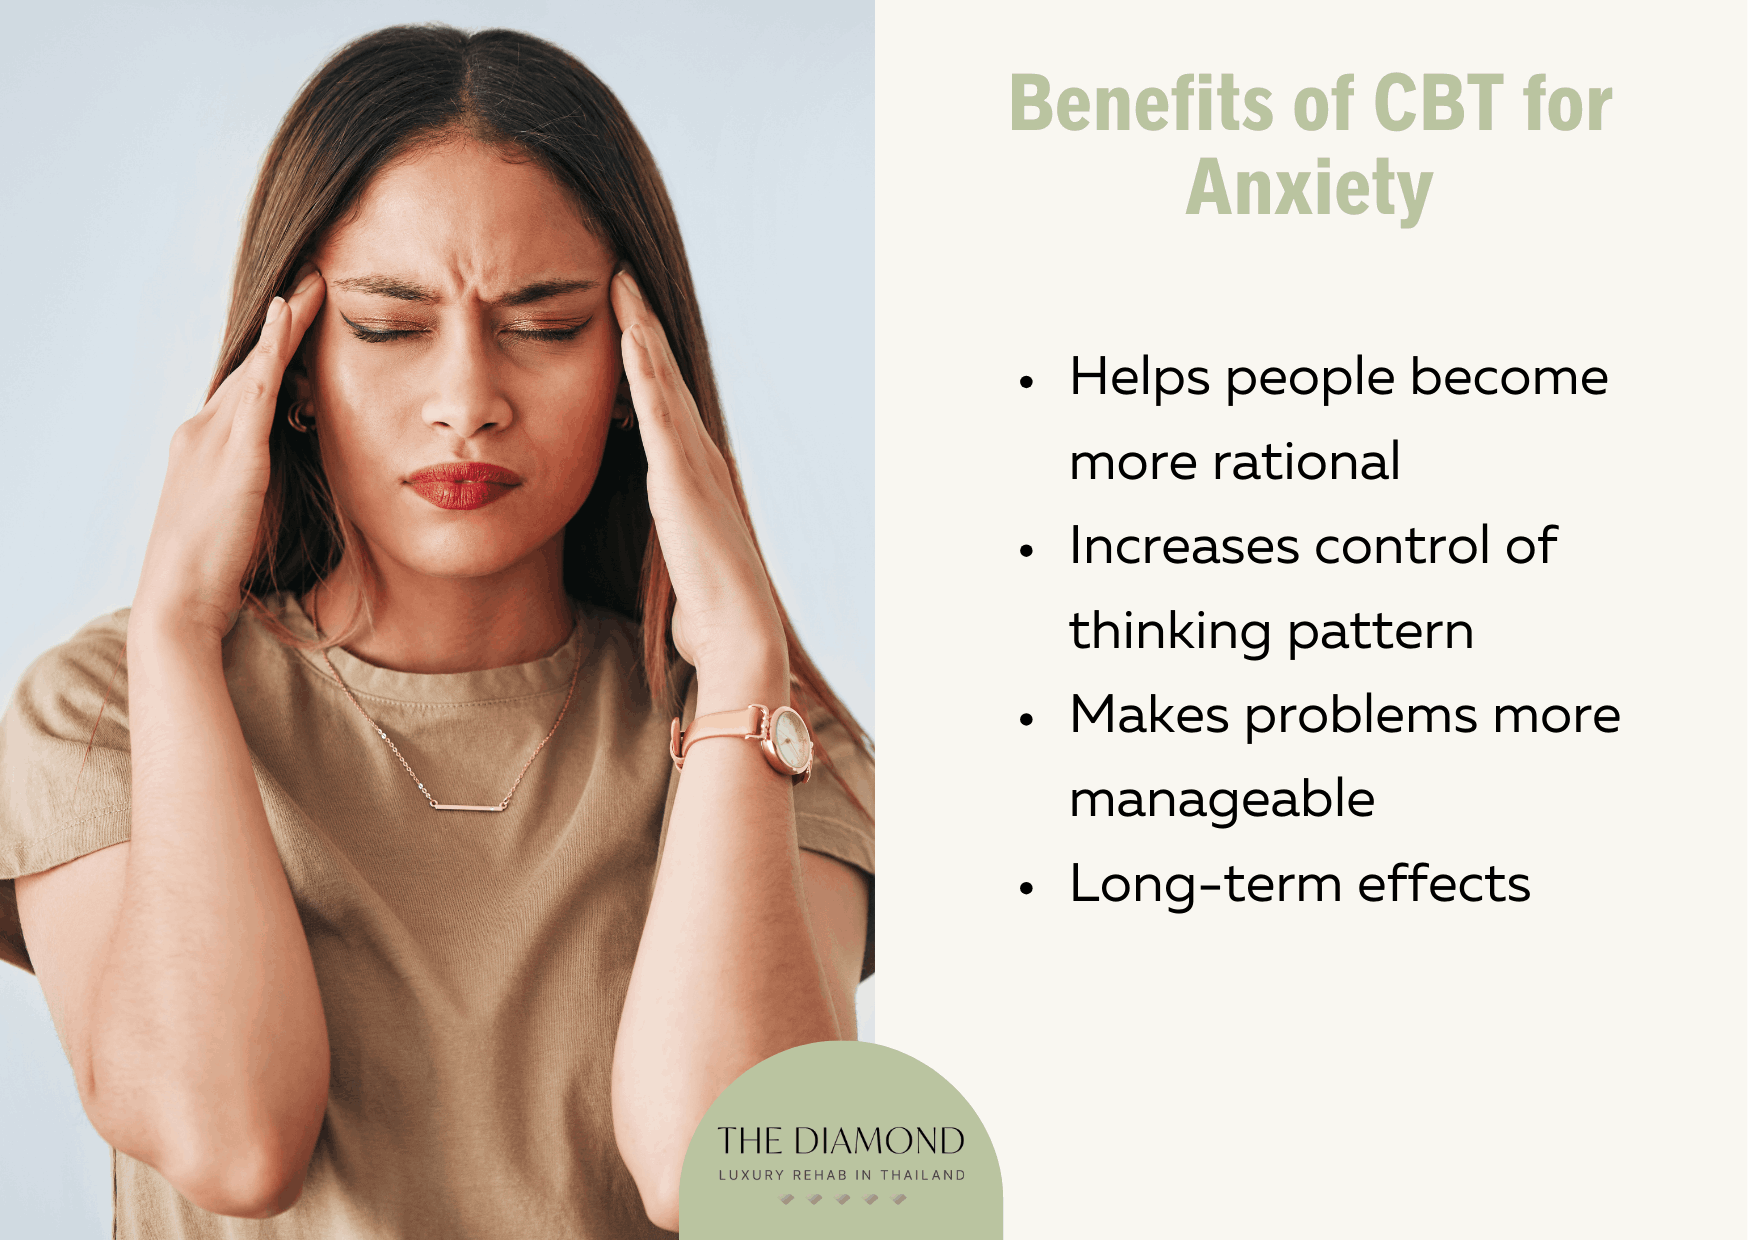 Benefits of CBT therapy for anxiety